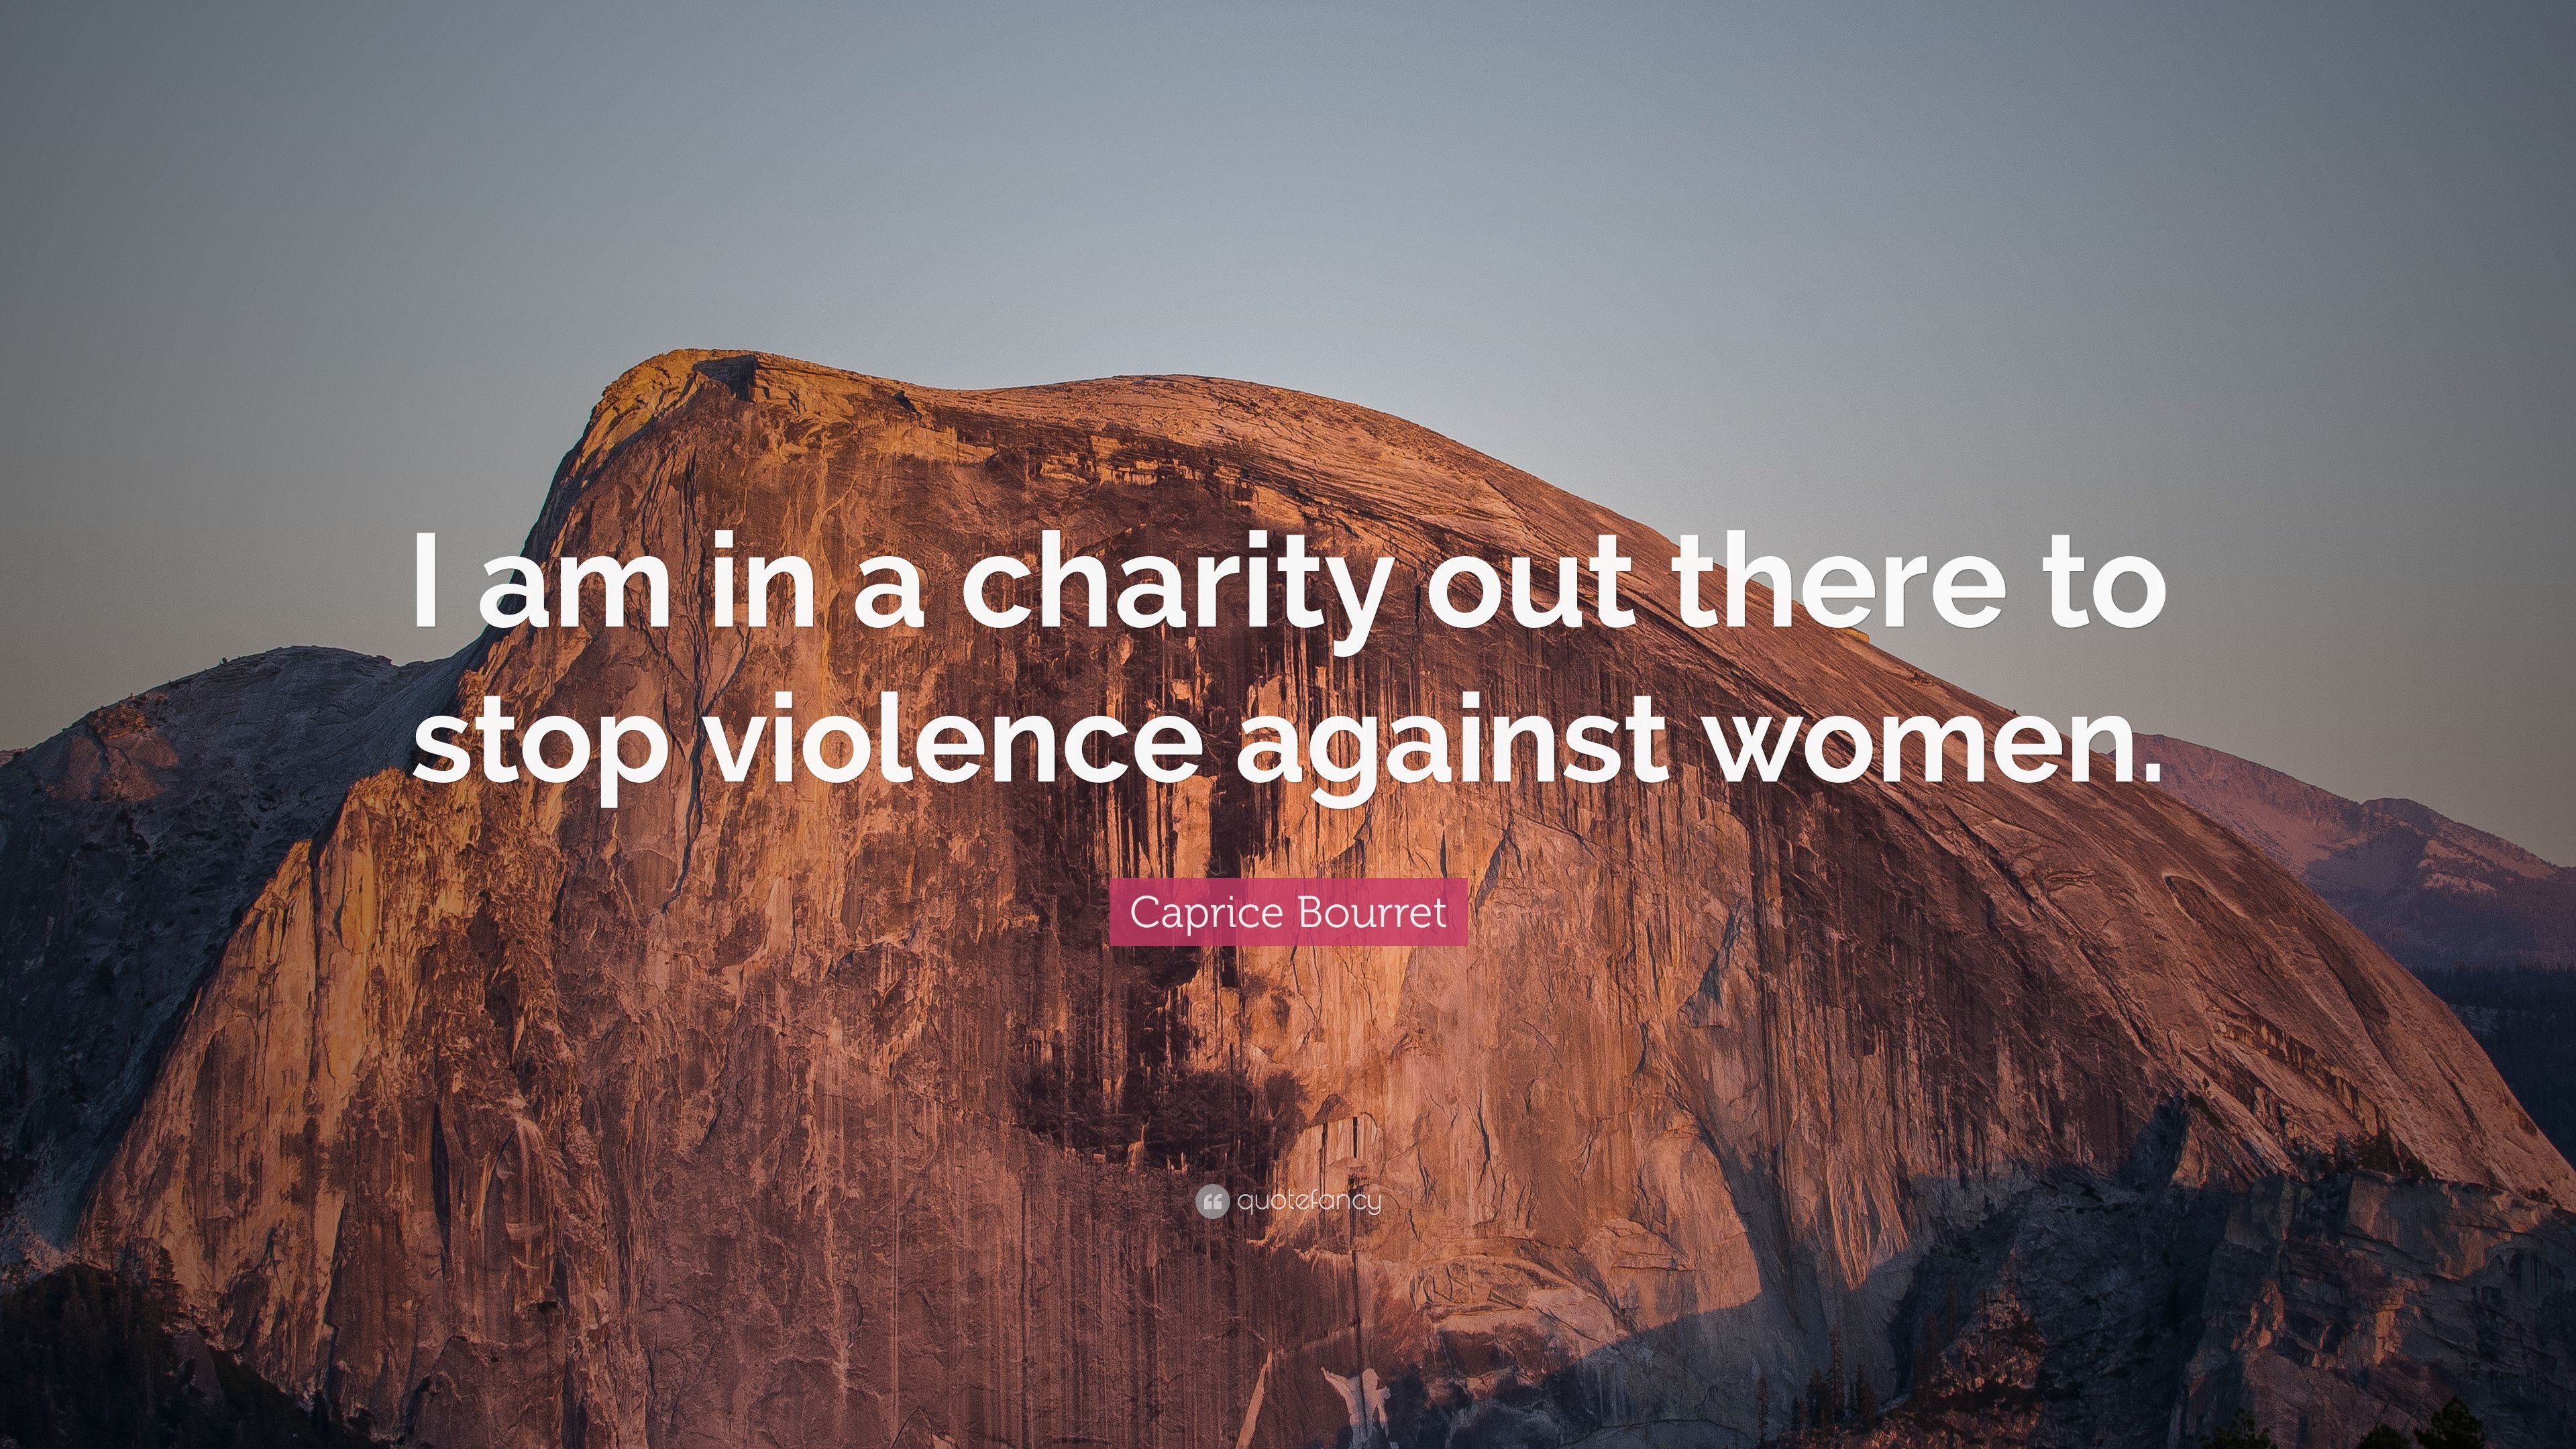 Caprice Bourret Quote: “I am in a charity out there to stop violence against women.” (7 wallpaper)